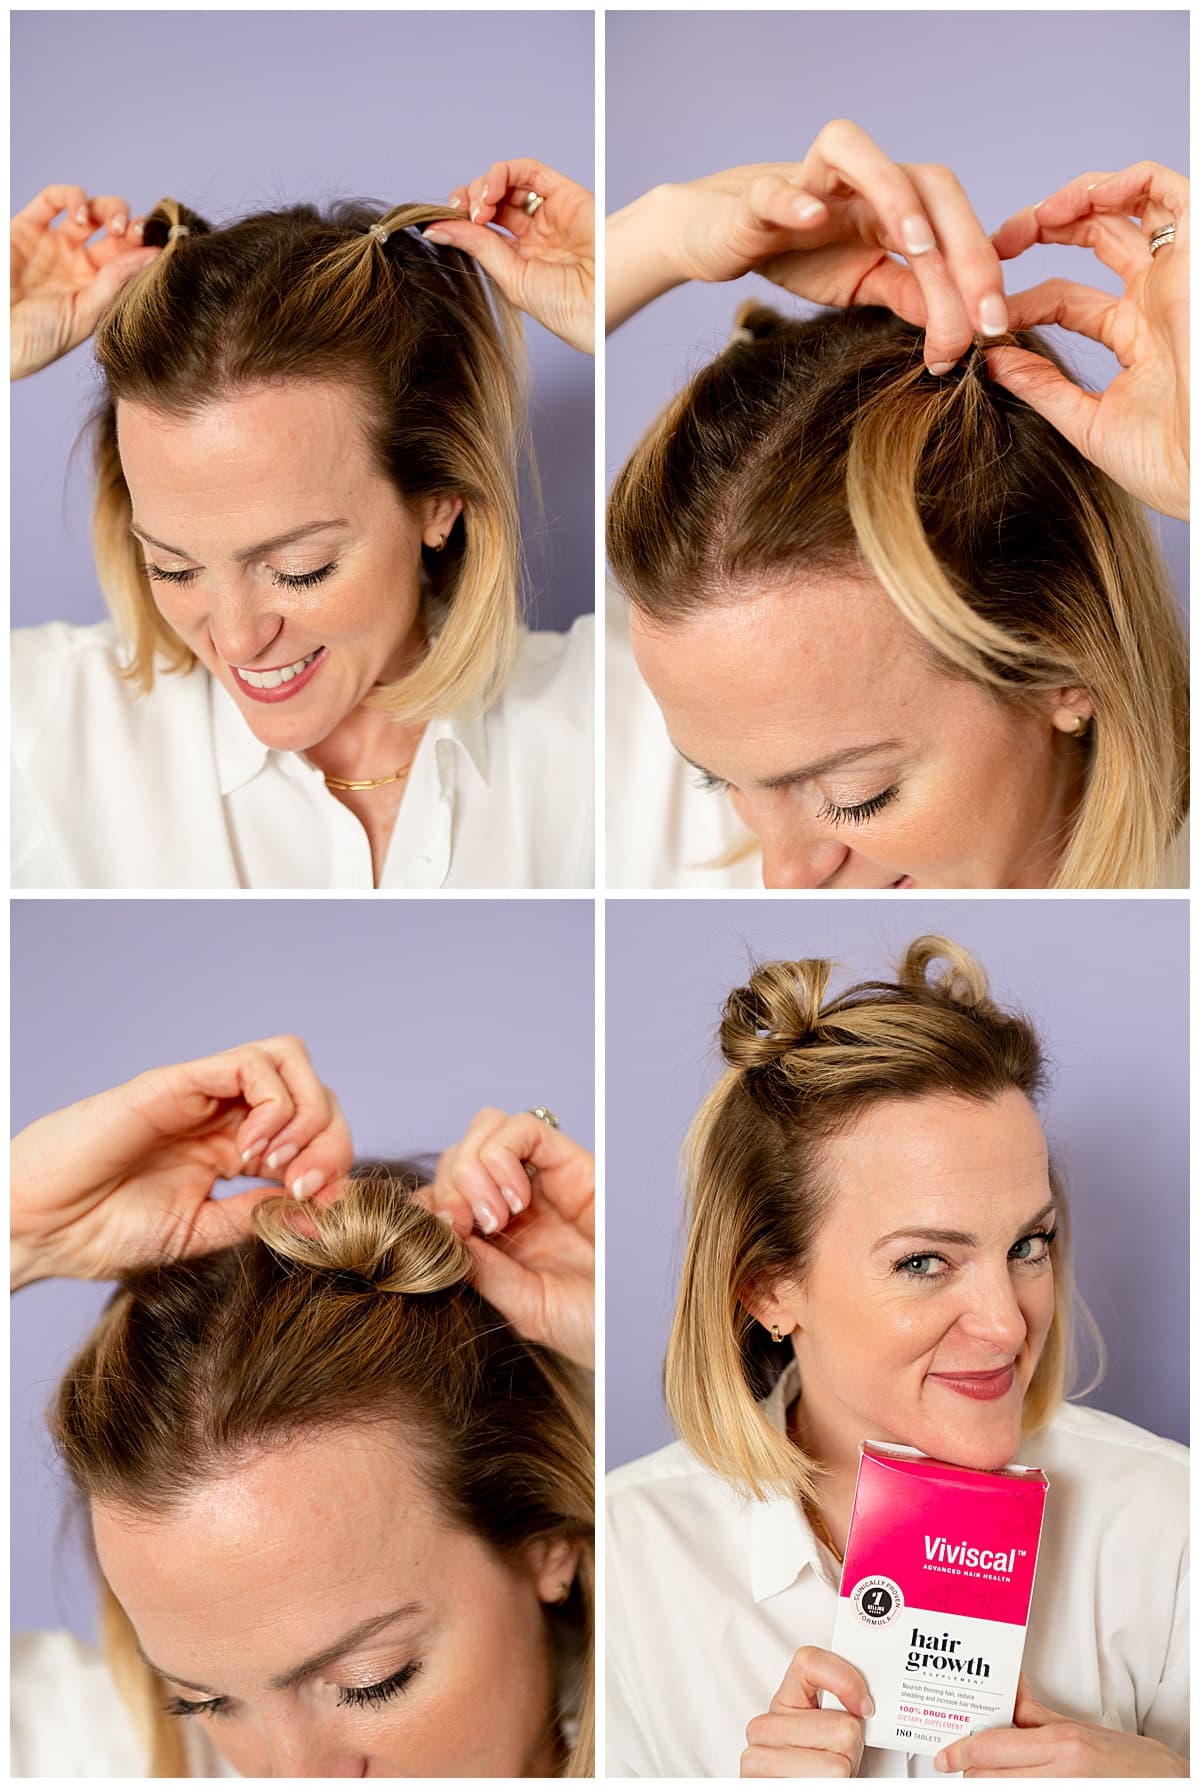 Step by step tutorial of how to do mini mom buns. Woman is showing how to do half up top buns in her hair and showing Viviscal supplement.